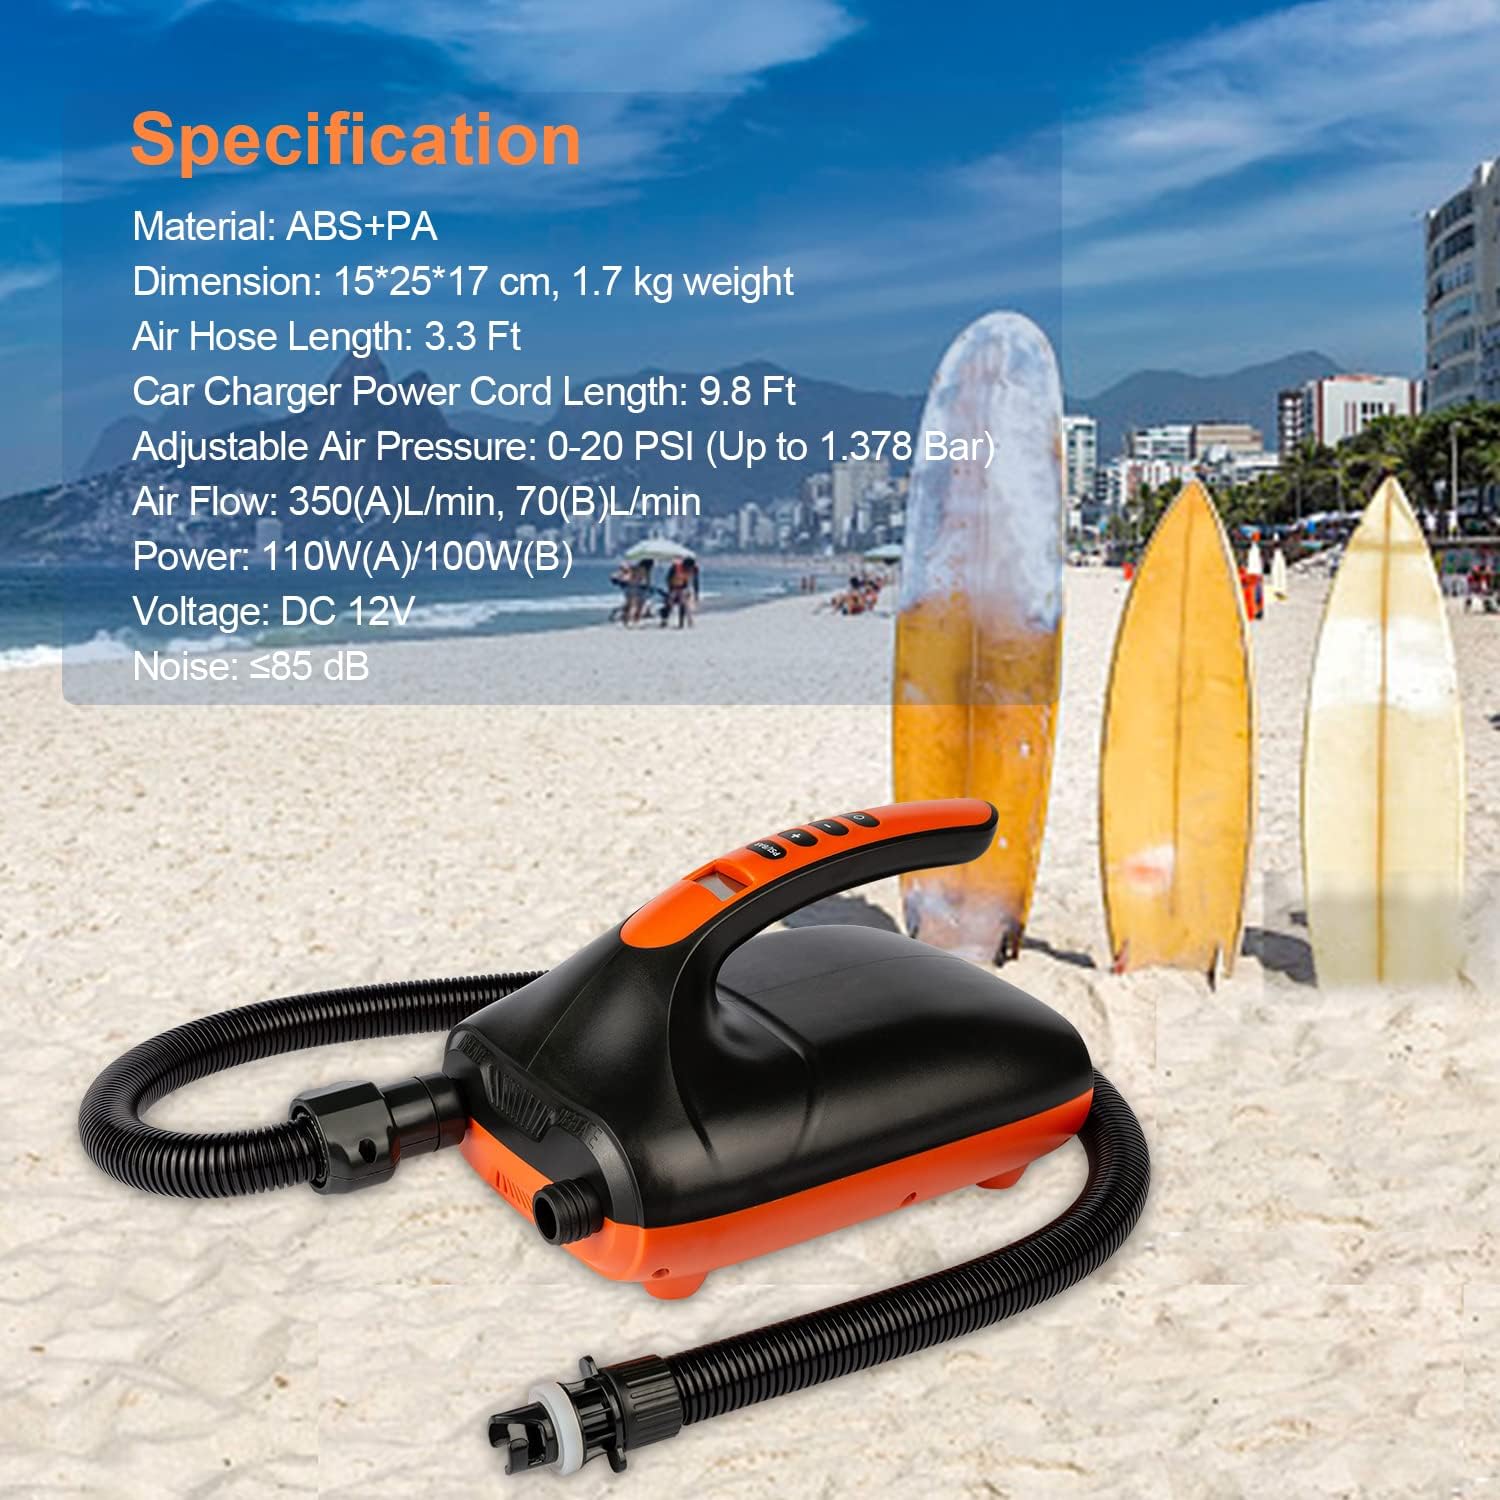 20PSI High Pressure SUP Air Pump, Dual Stage Inflation & Deflation Function Paddle Board Pump, 12V DC Car Connector, for Inflatable Stand Up Paddle Boards, Boats, Tent Kayaks Namiedstore